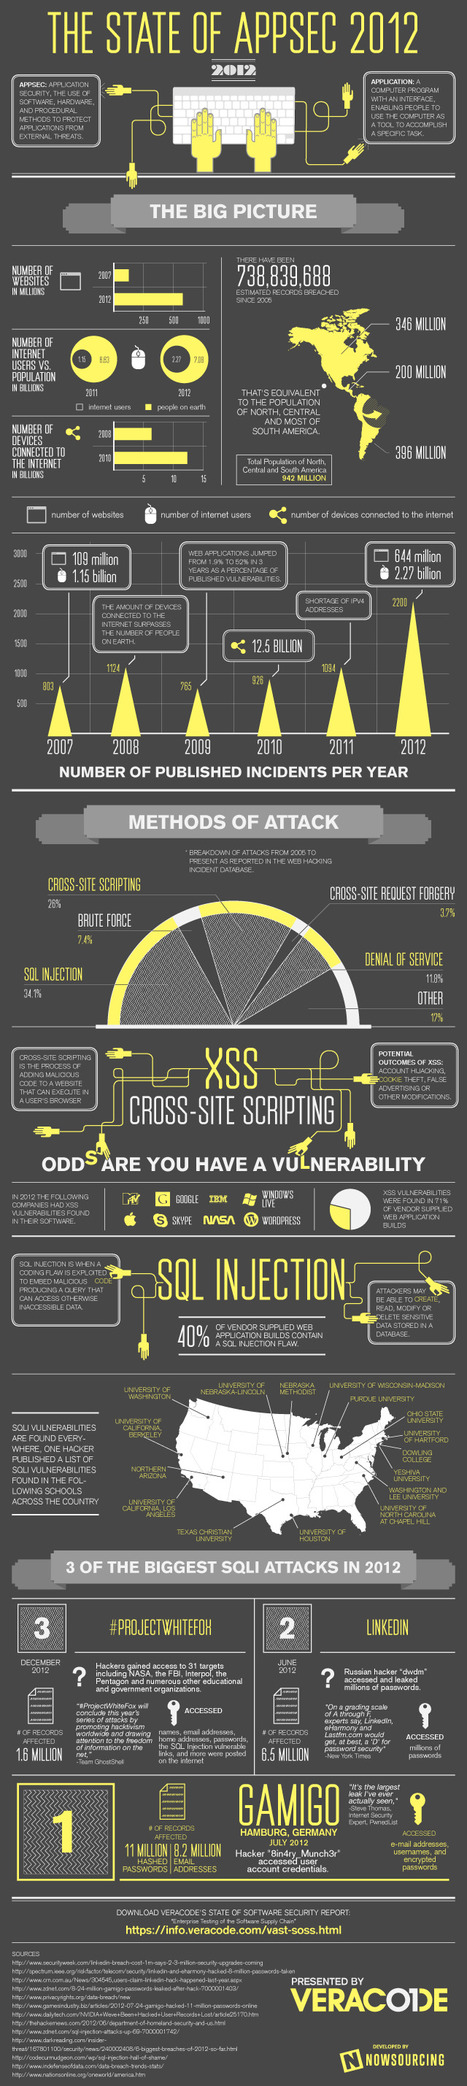 The State of Application Security 2012 Infographic - HACKS [Infographic] | 21st Century Learning and Teaching | Scoop.it